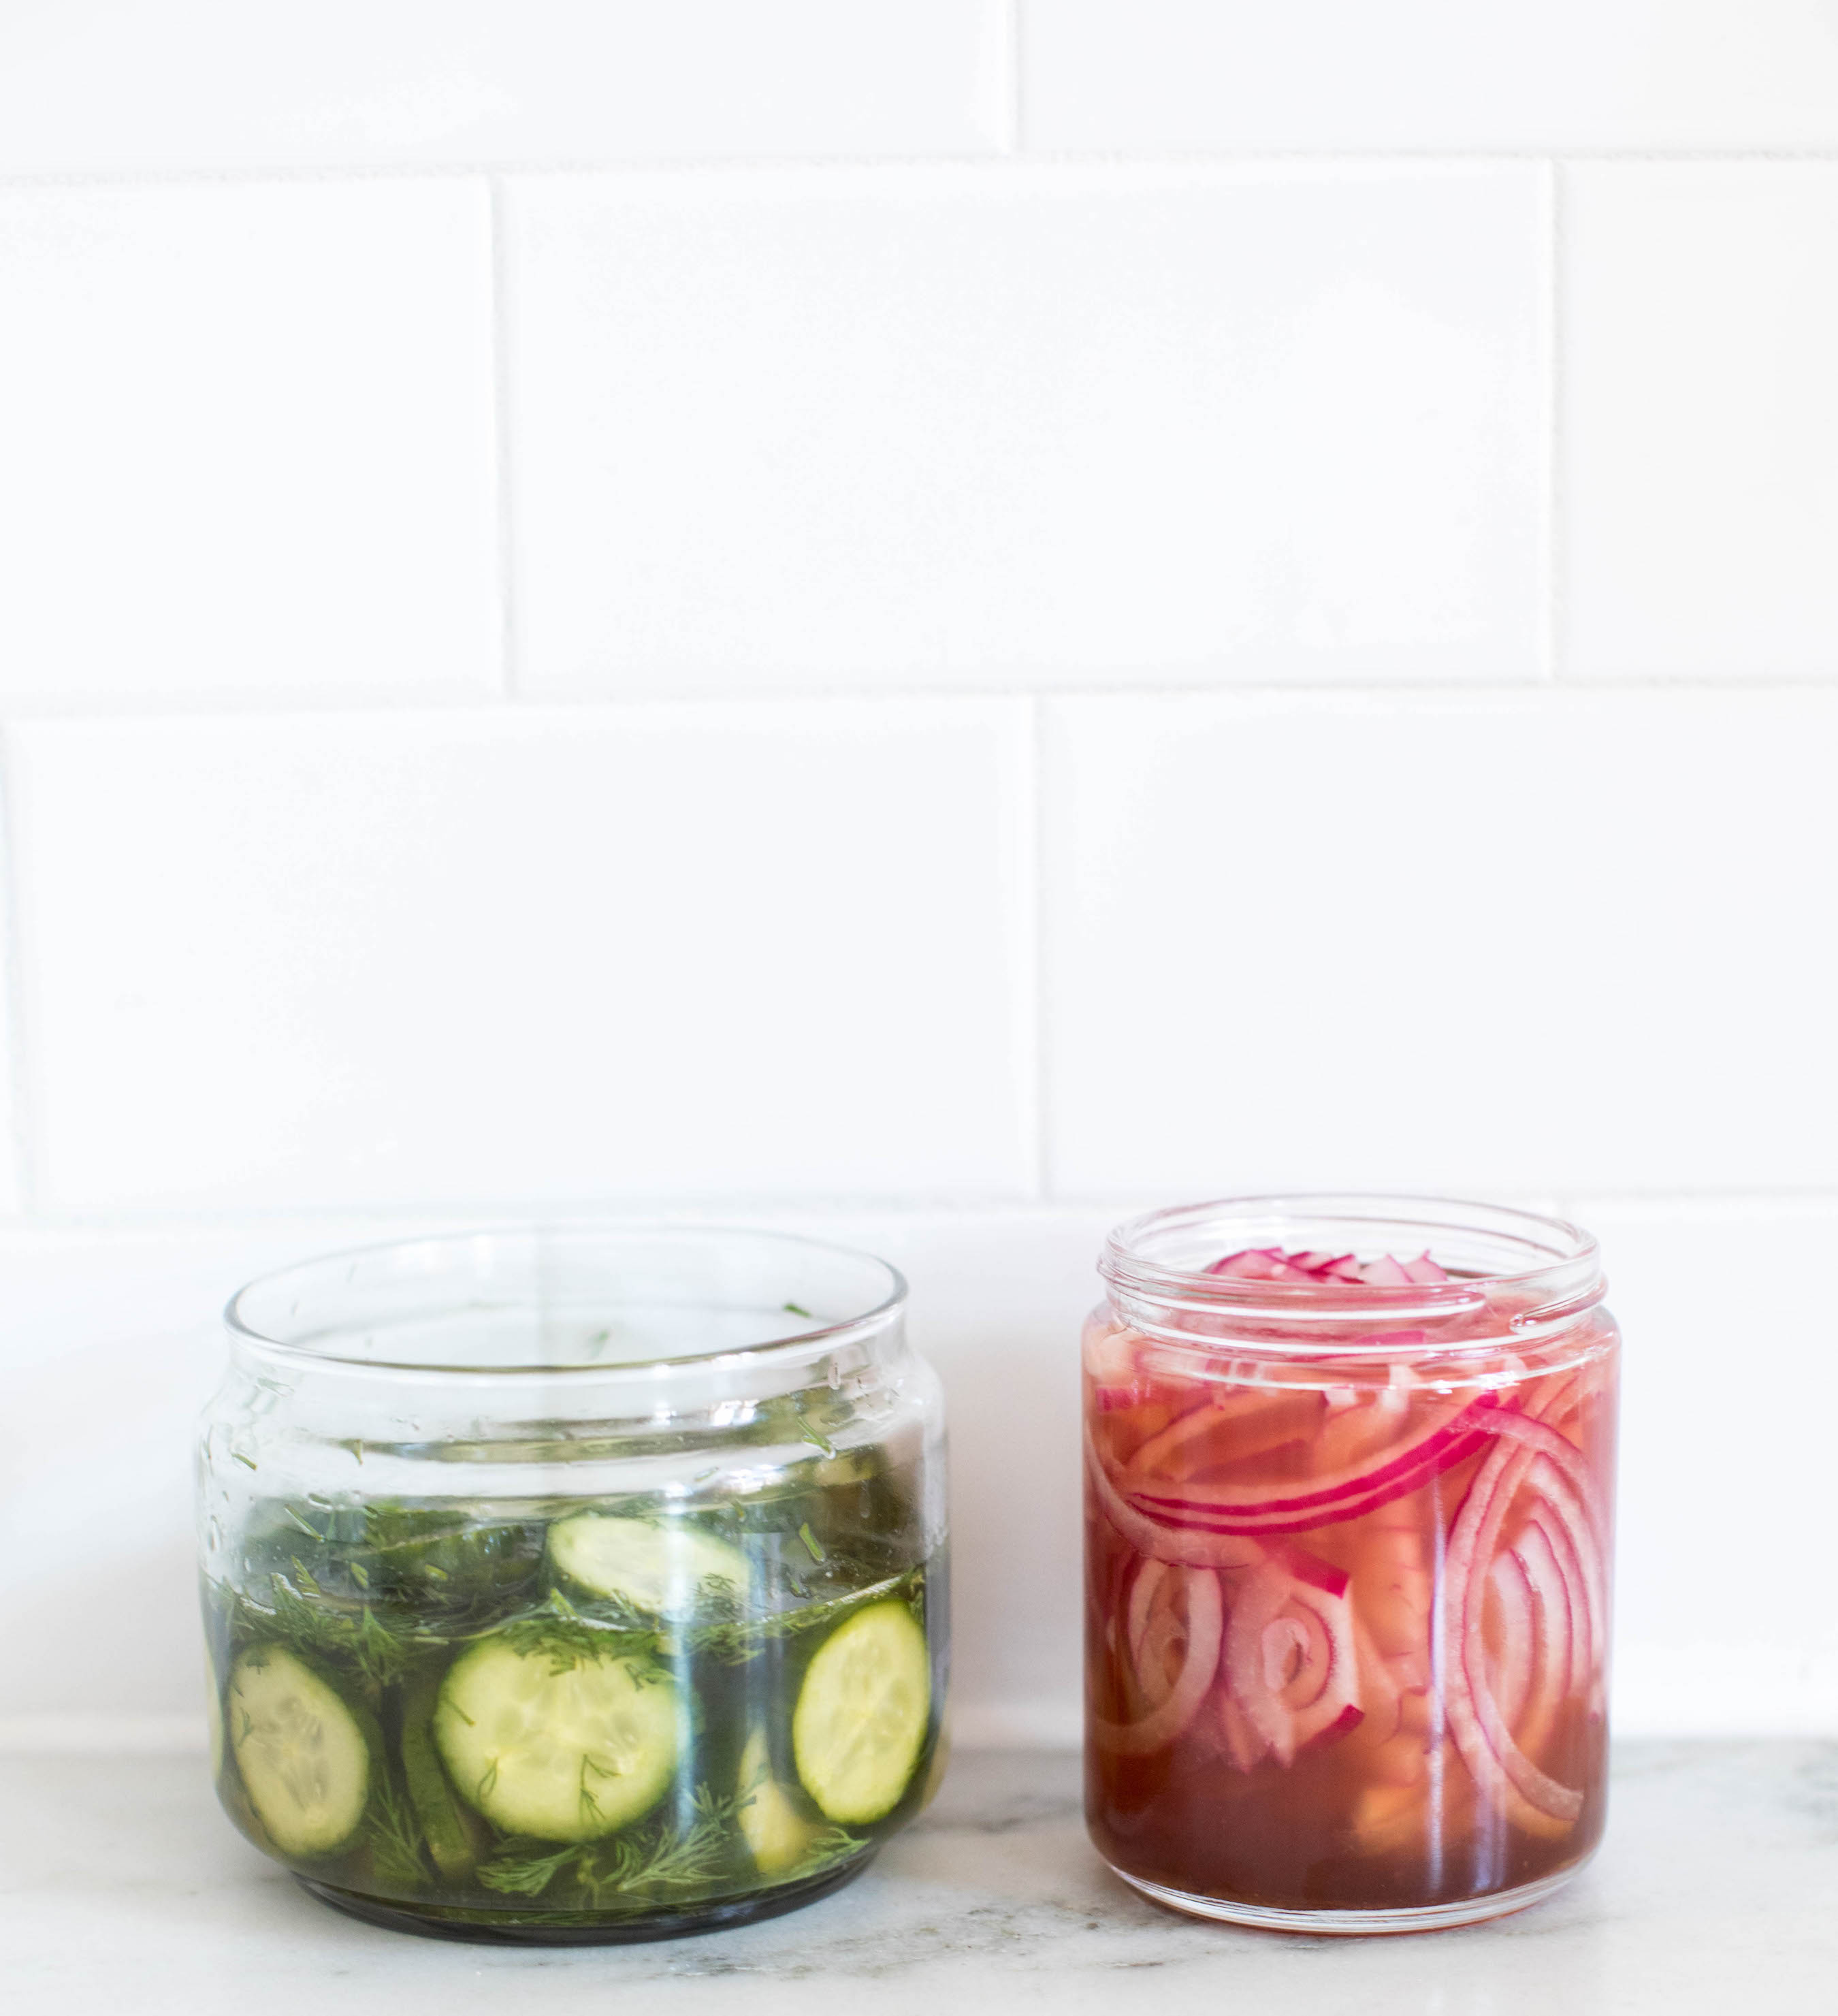 9 Fermented Foods for Better Digestive Health and Immunity